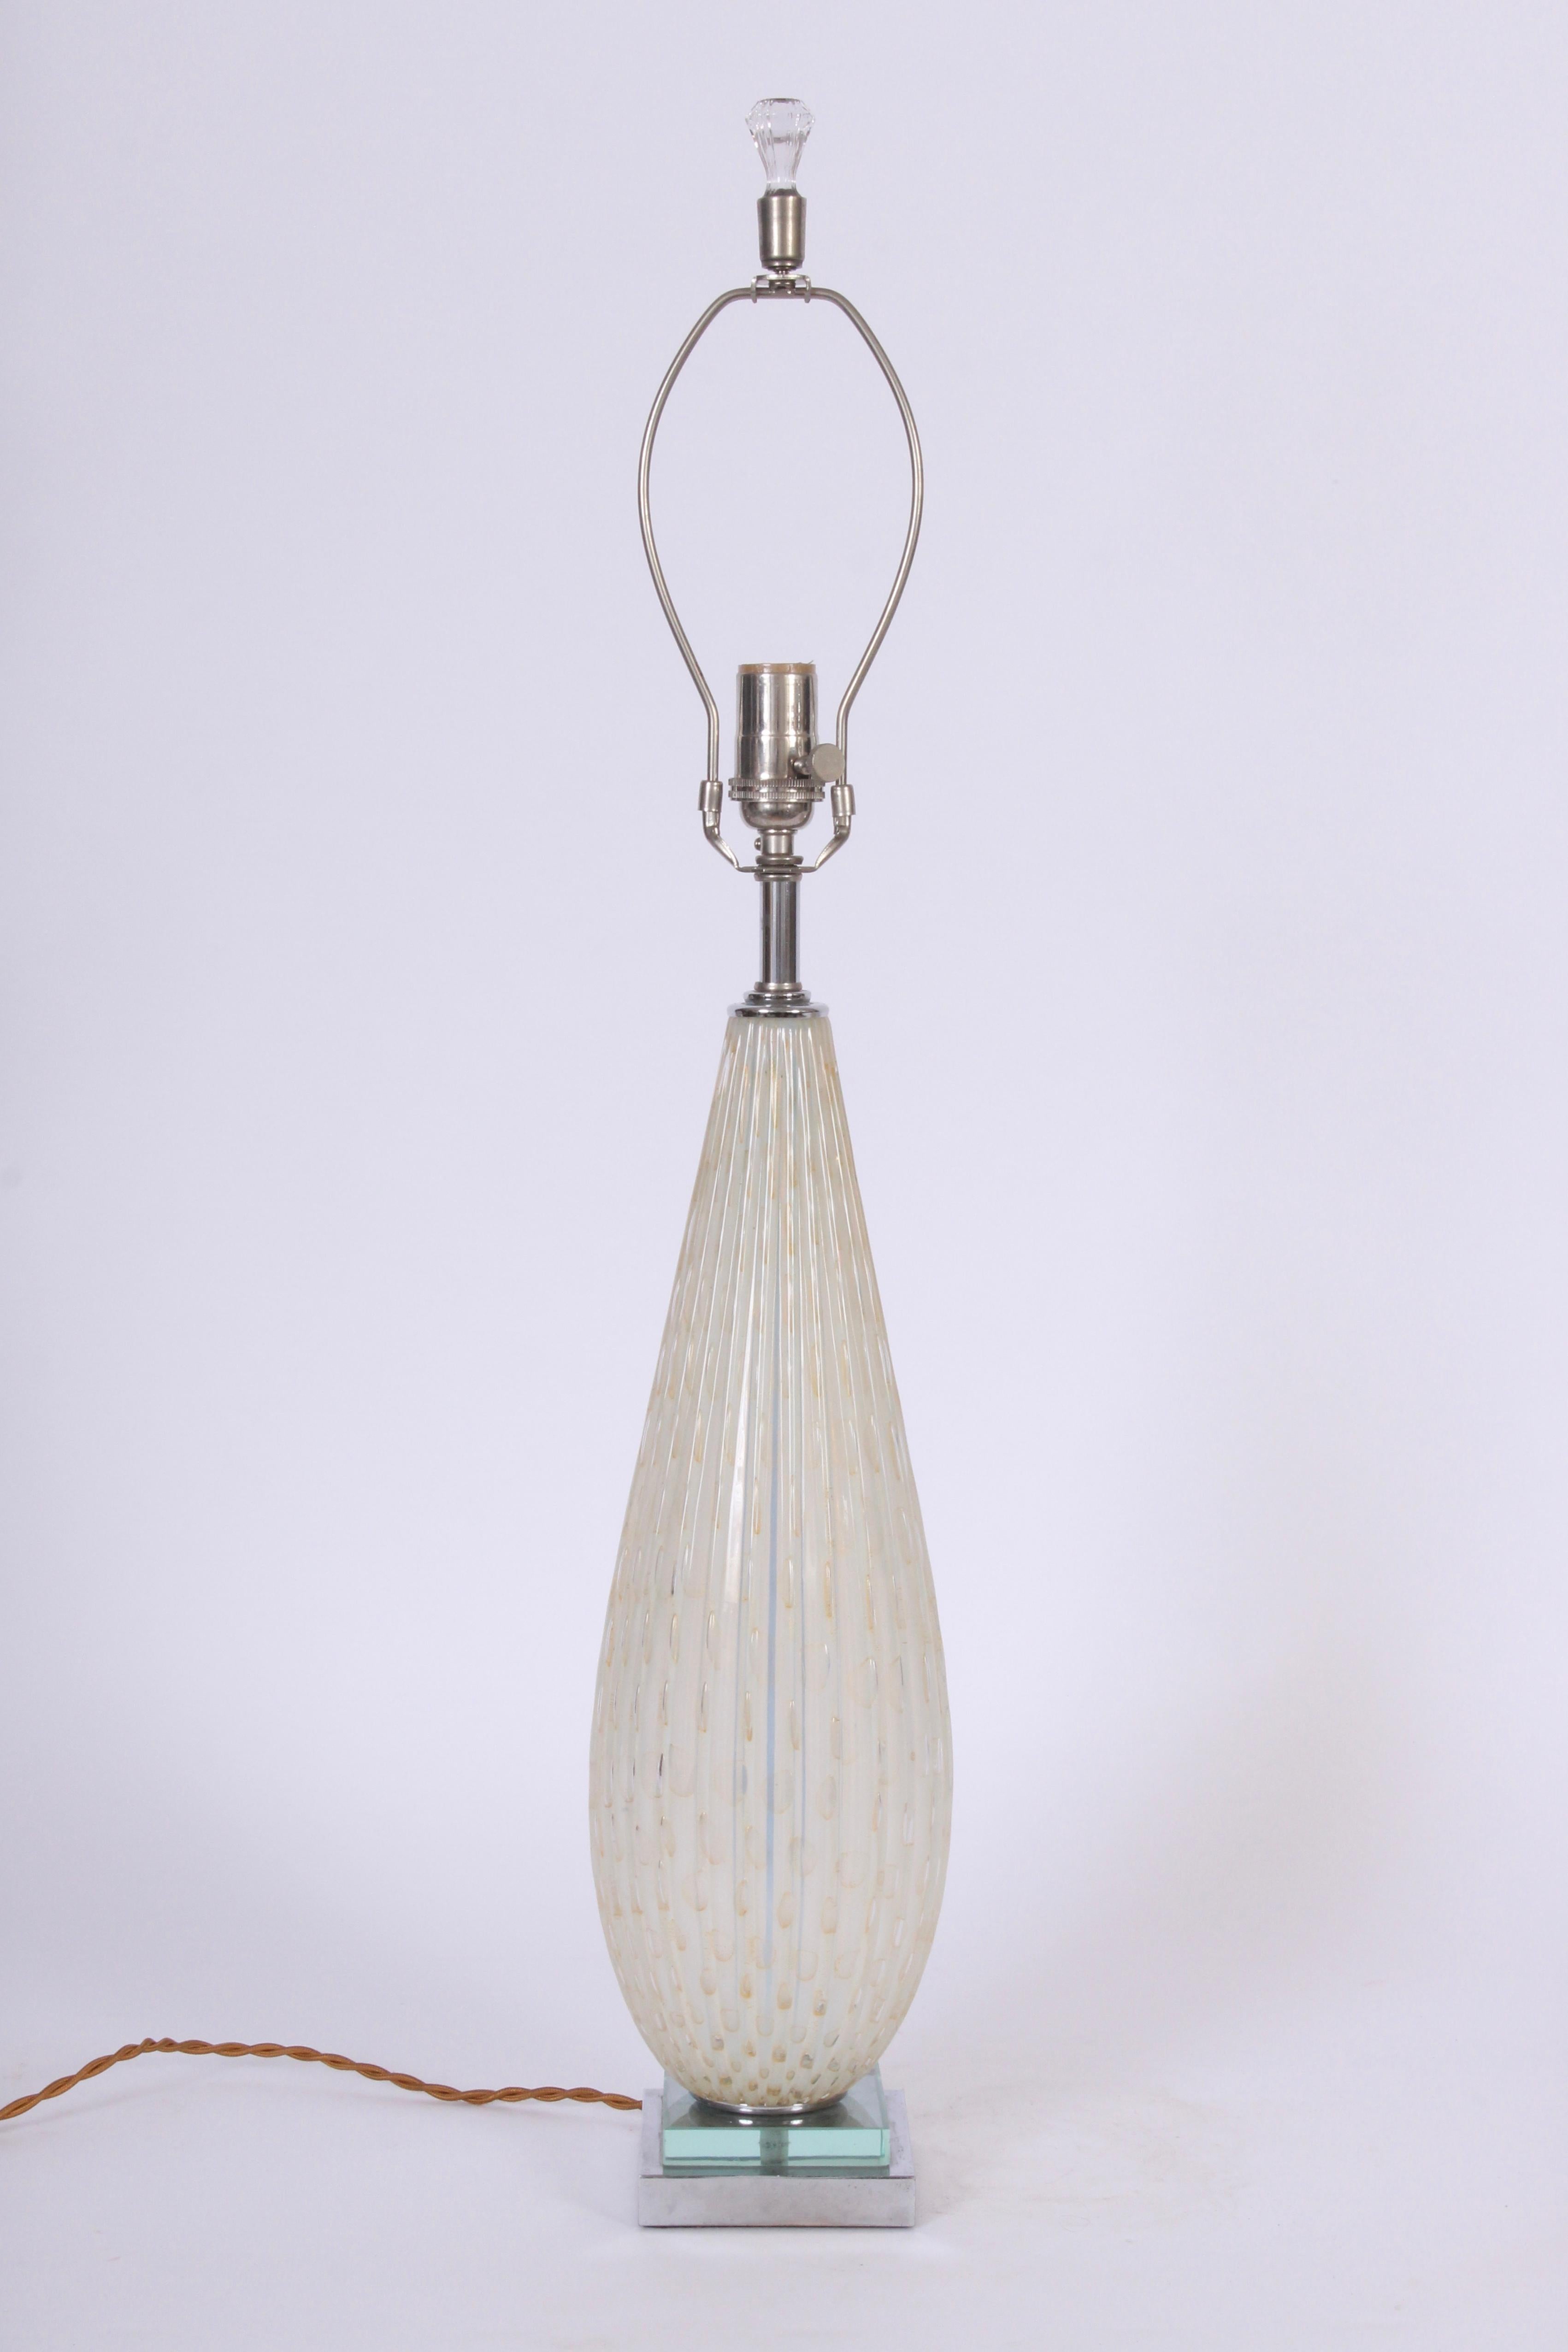 Monumental Alfredo Barbini Opaline Murano Glass Table Lamp with Gold rimmed bubbles, 1950's. Small footprint.  Featuring a slender, hand blown, translucent White tear drop form with controlled oval bubbles on a stacked square Chrome and Crystal base